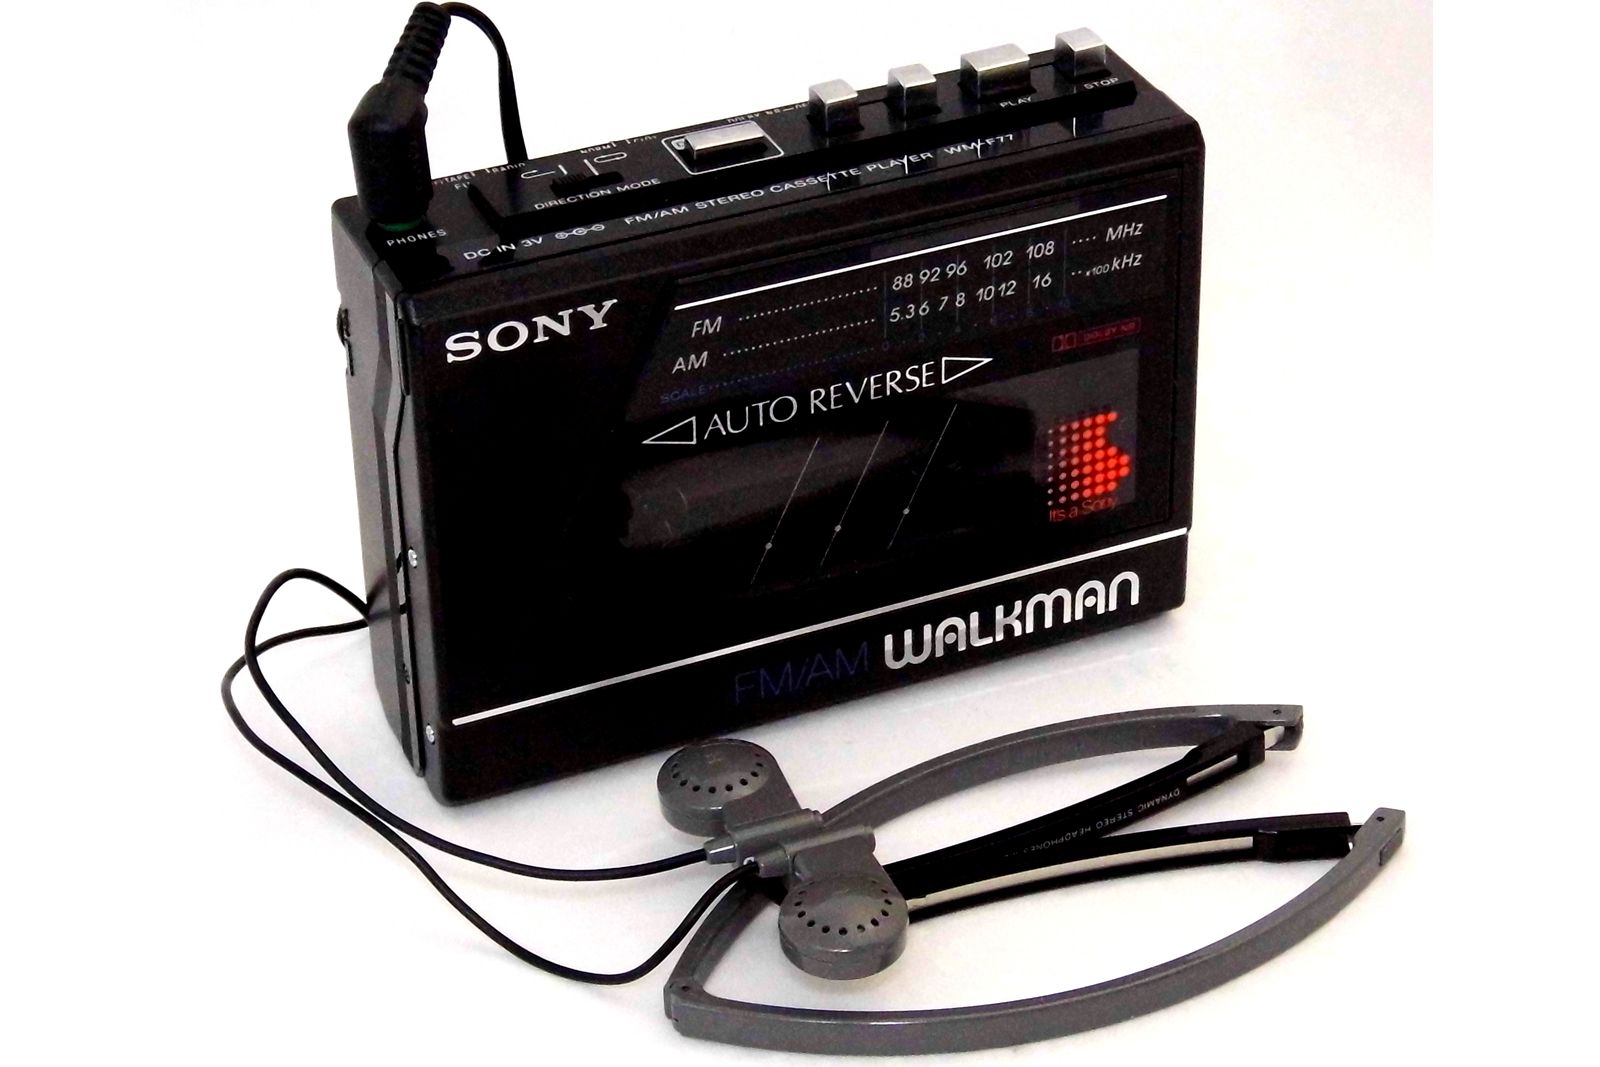 12 best 1980s gadgets that defined a decade image 4